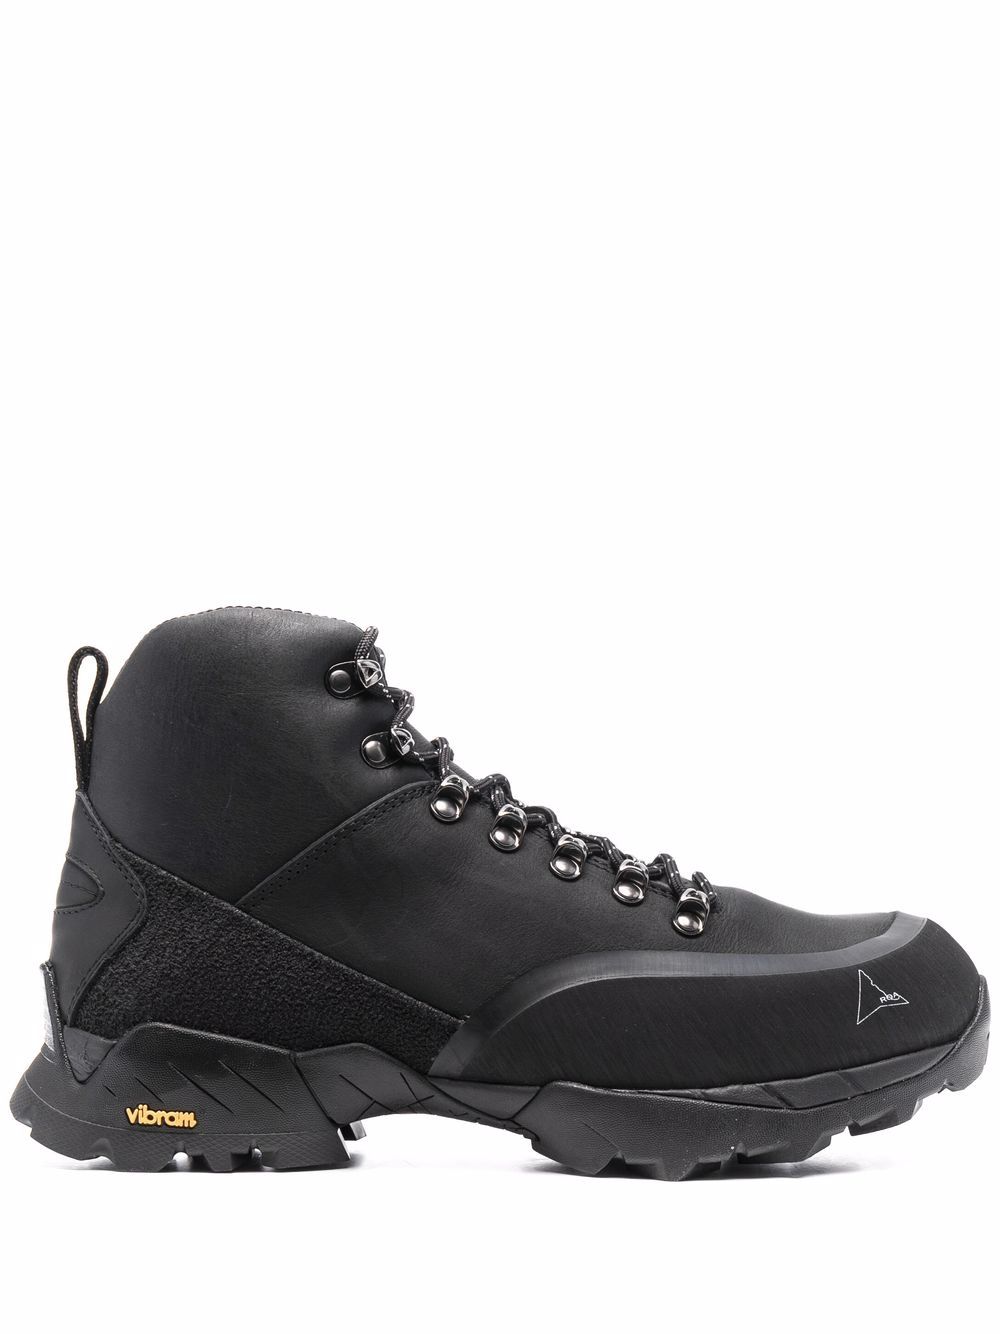 ROA Andreas lace-up hiking boots - Black von ROA